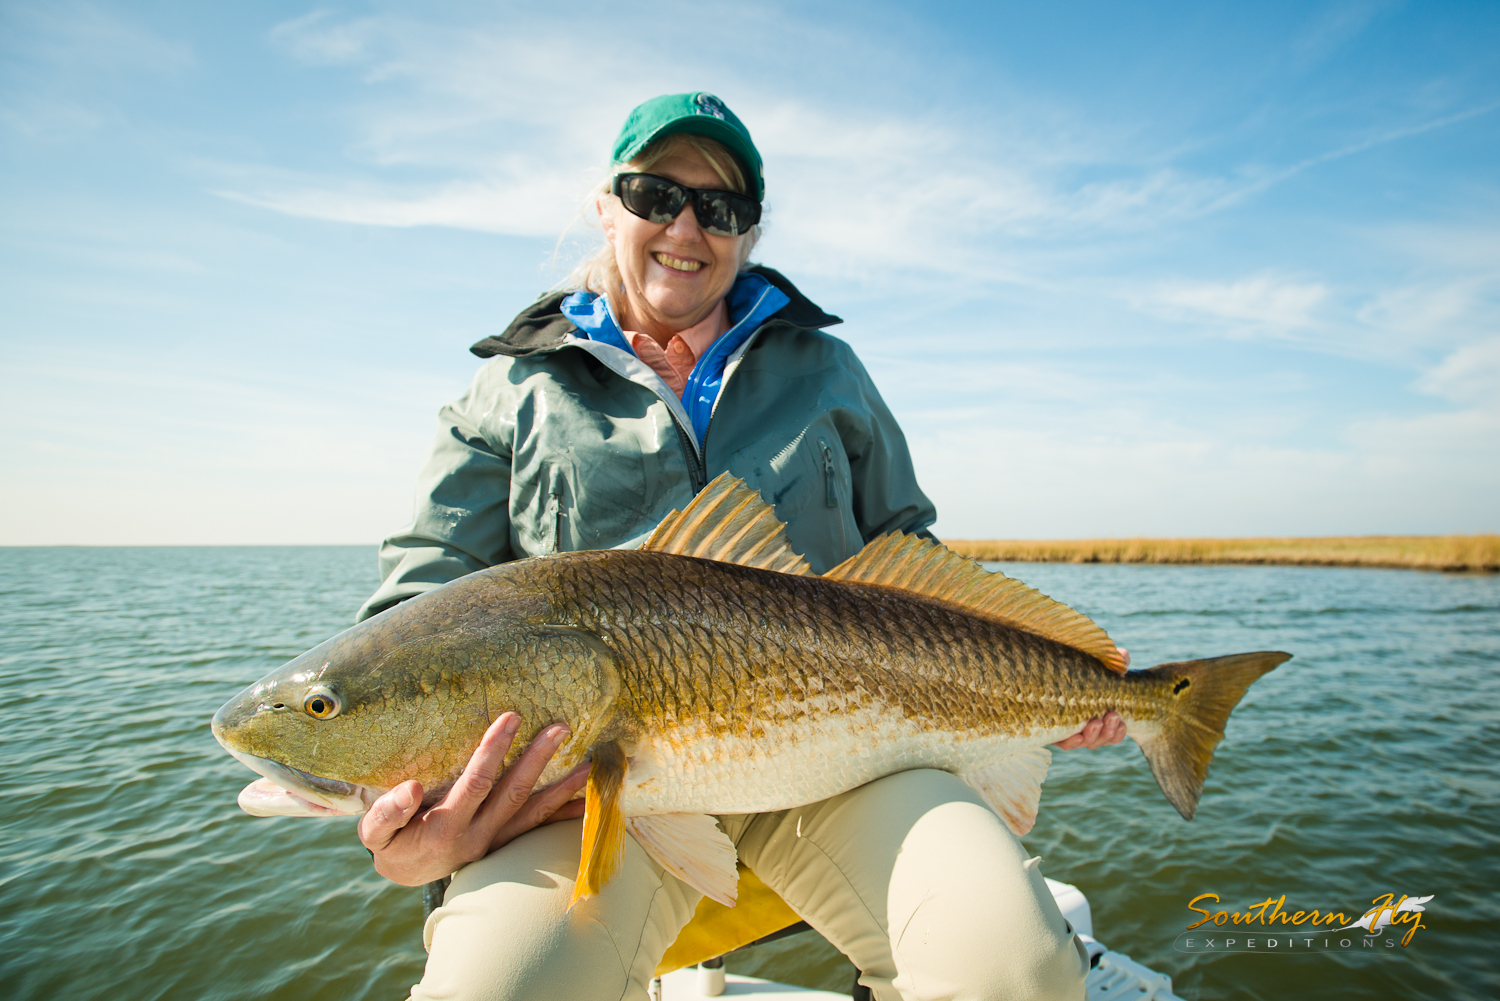 Women's Day Fishing Light Tackle Guide Southern Fly Expeditions